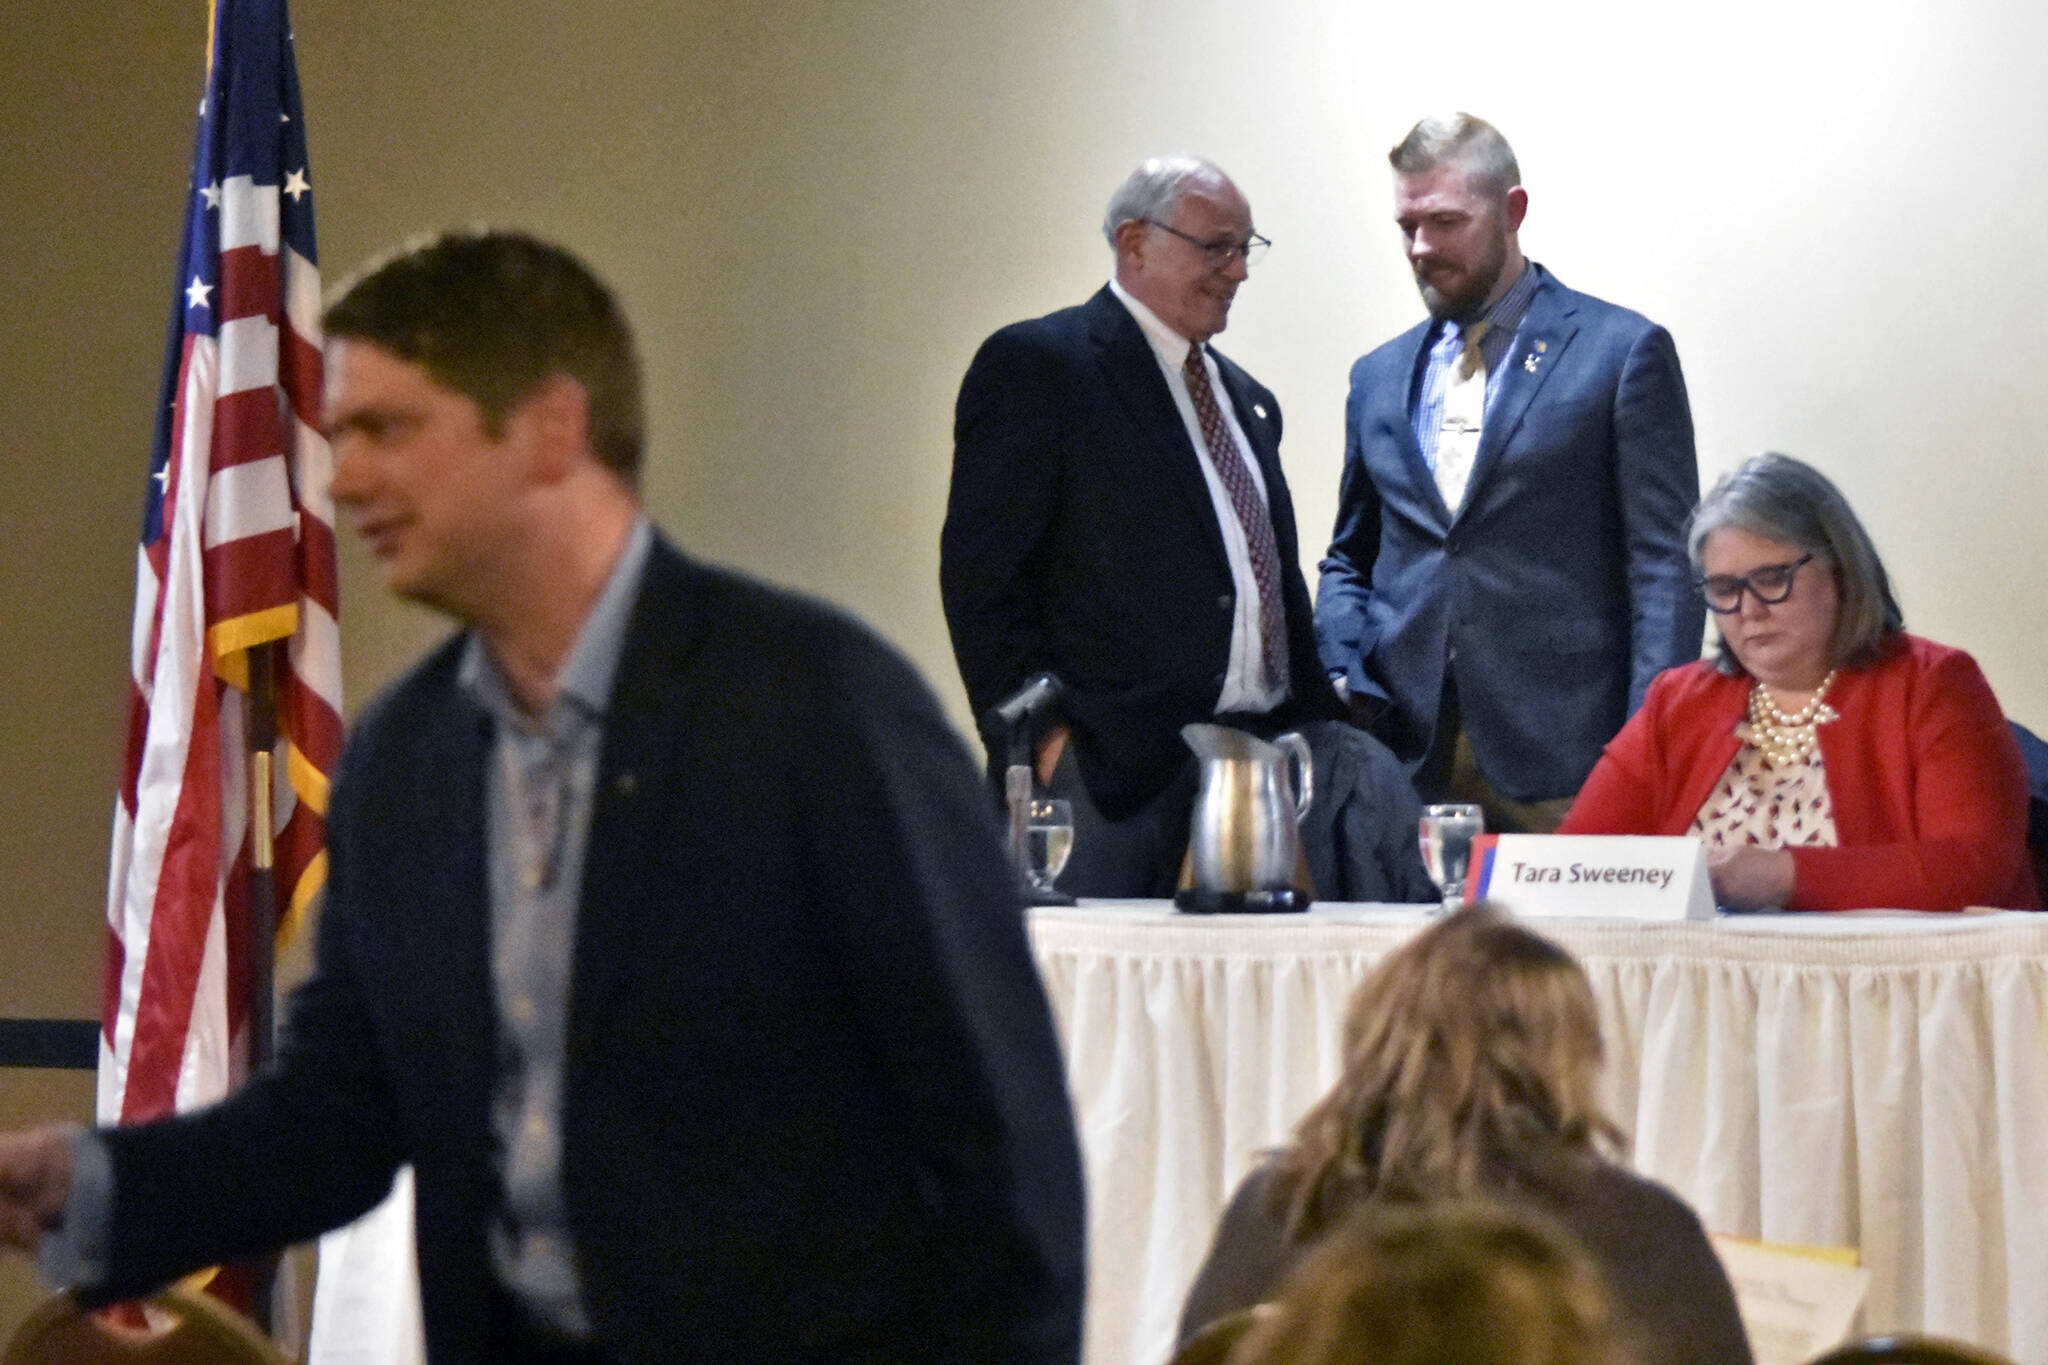 From left to right, Nick Begich III, foreground, and John Coghill, state Sen. Josh Revak, R-Anchorage, and Tara Sweeney, all Republican candidates for Alaska’s seat in the U.S. House of Representatives, were at Juneau’s Baranoff Hotel on Tuesday, May 16, 2022, for a debate hosted by local Republicans. (Peter Segall / Juneau Empire)